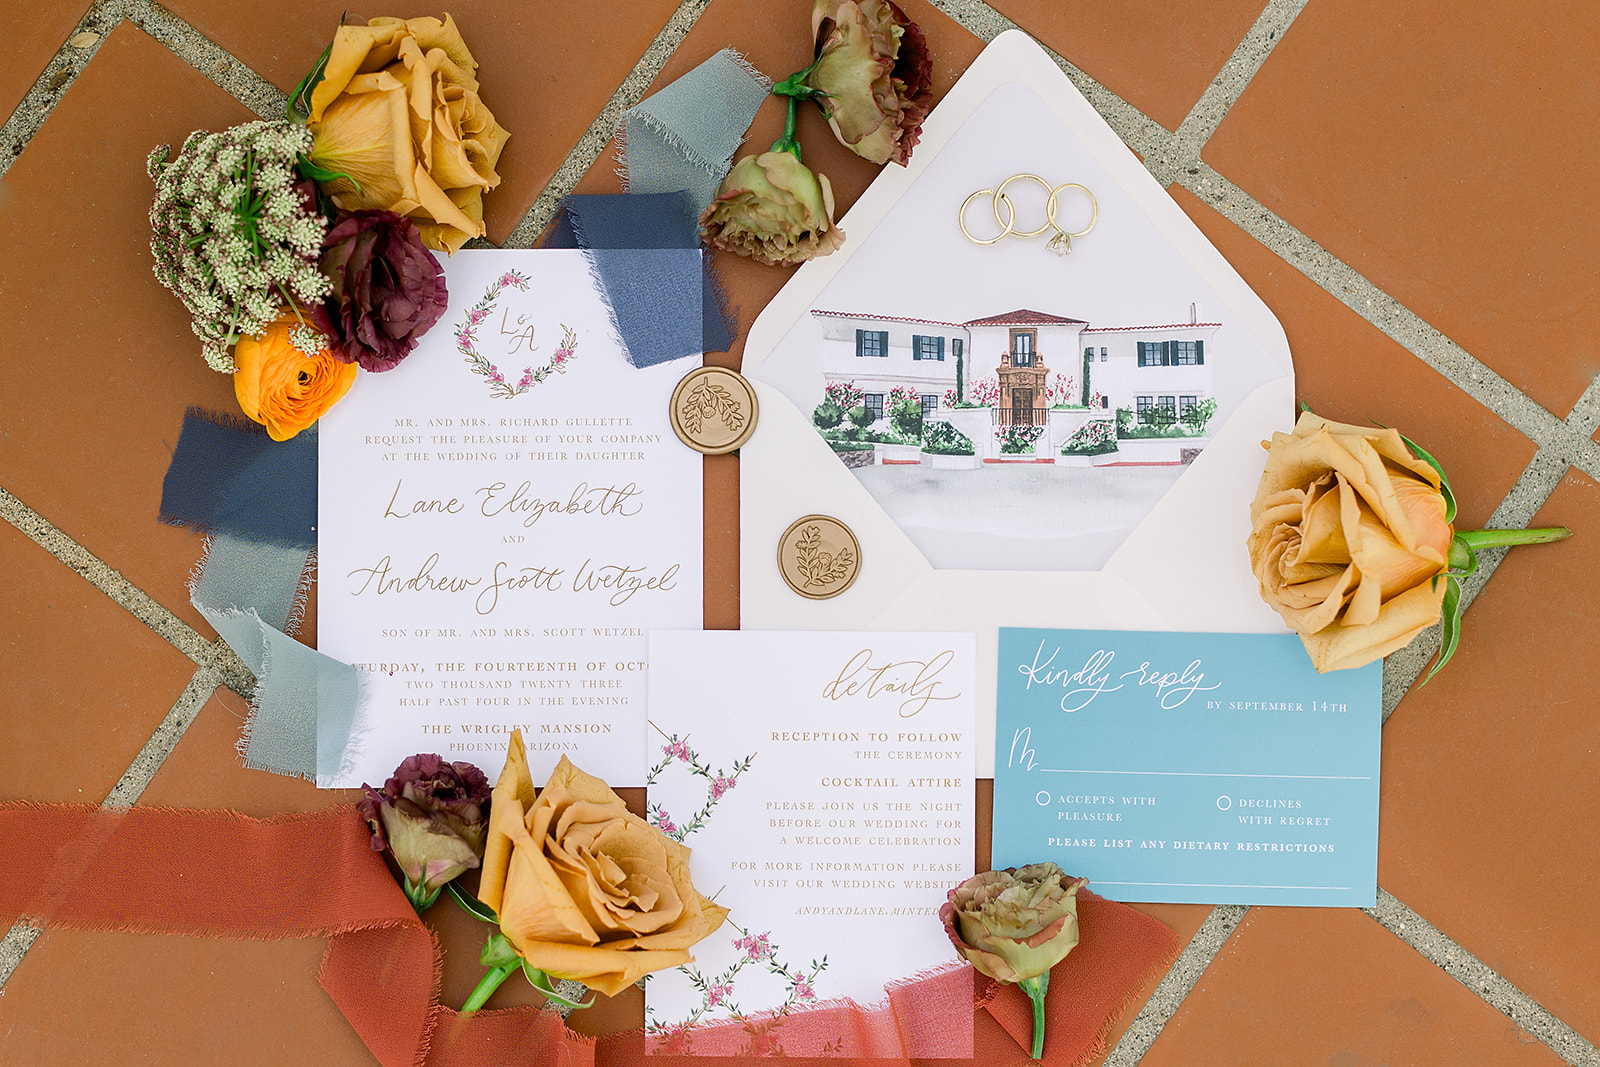 Gorgeous Wedding invitations pay tribute to historic venue